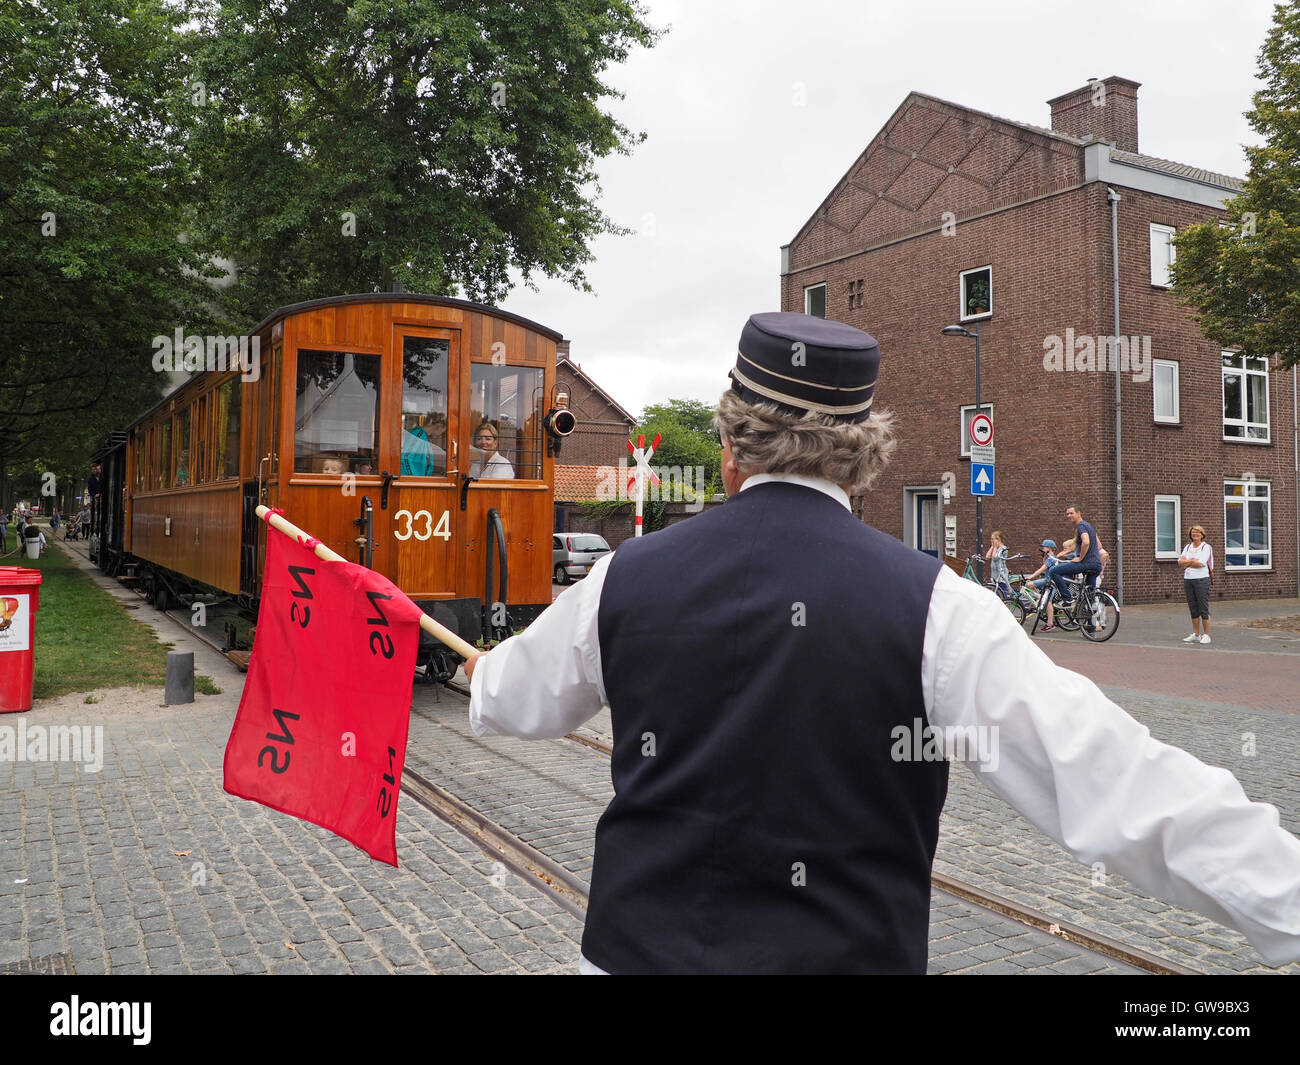 In the past a man with a red flag accompanied the steam tram, to warn other traffic at crossings like this one in Breda. Stock Photo